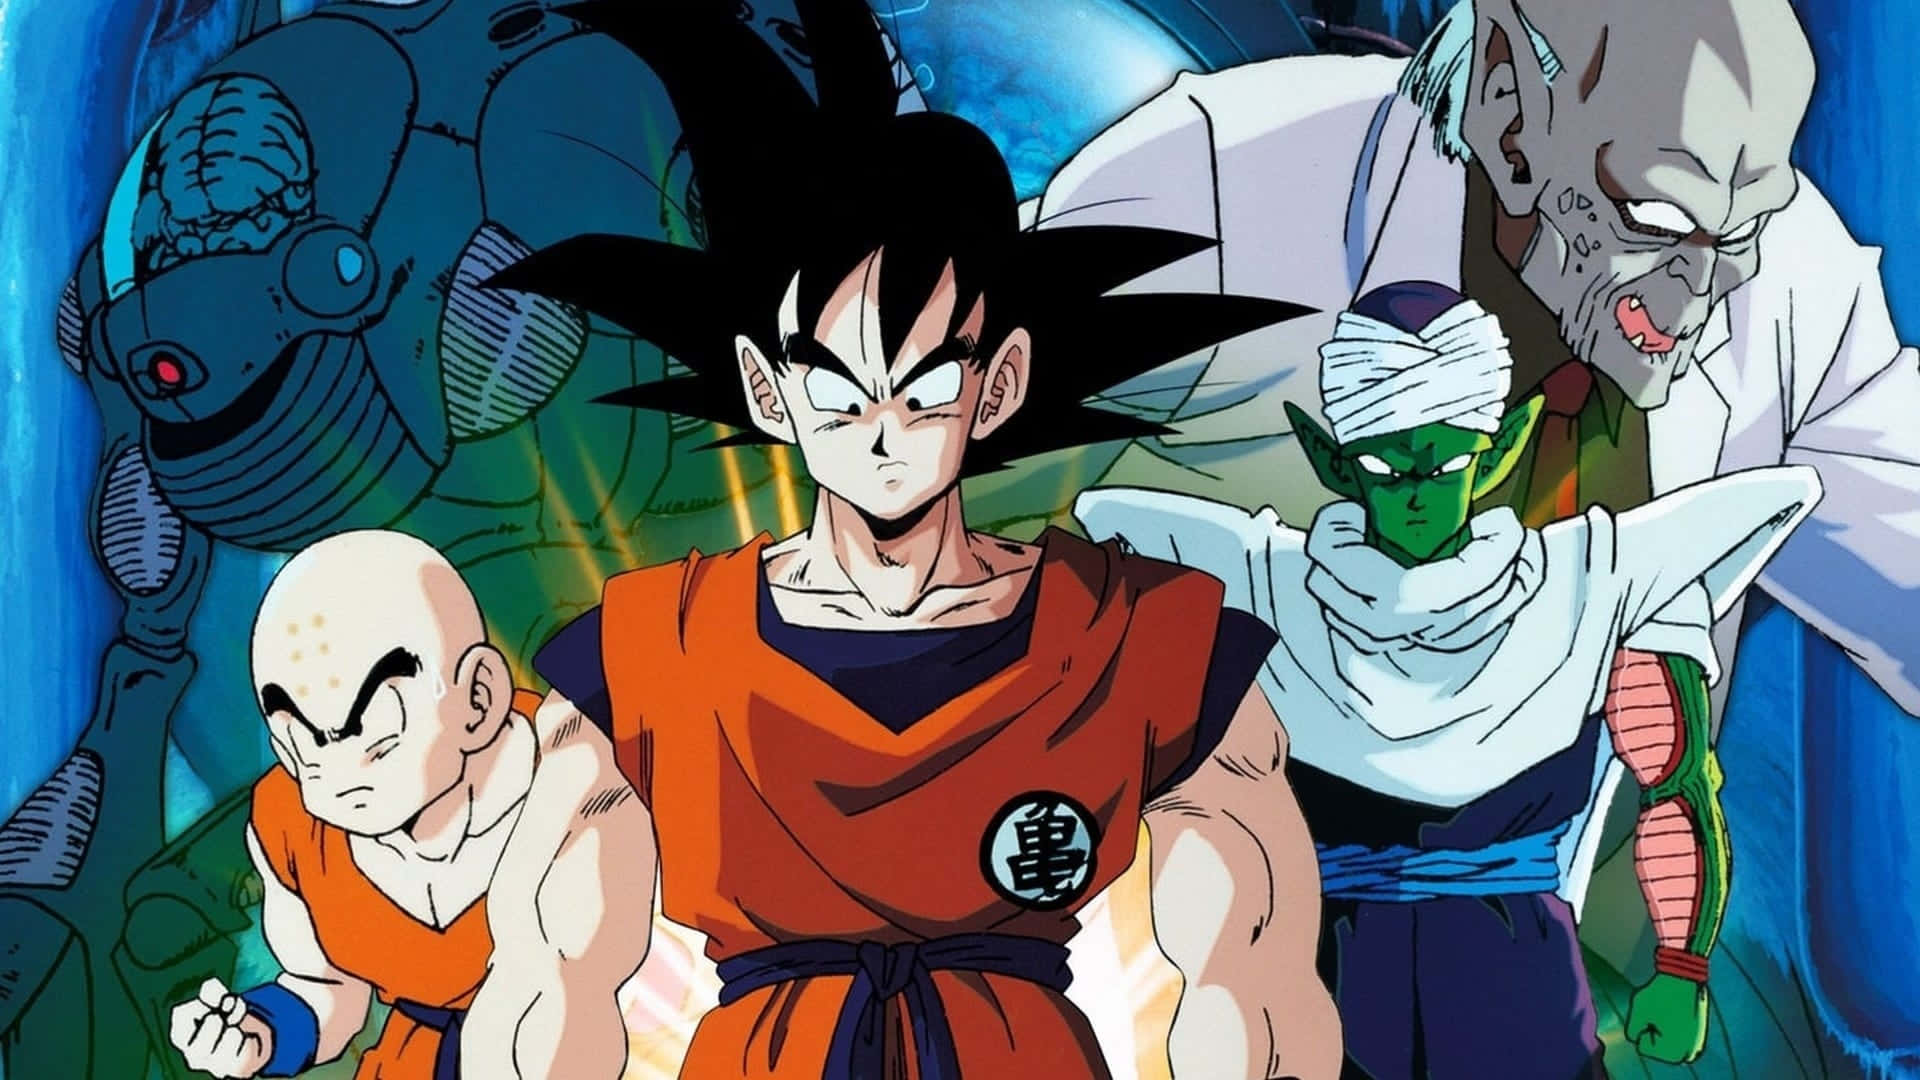 Get Ready to Experience the Epic Adventure of Dragon Ball Z Wallpaper